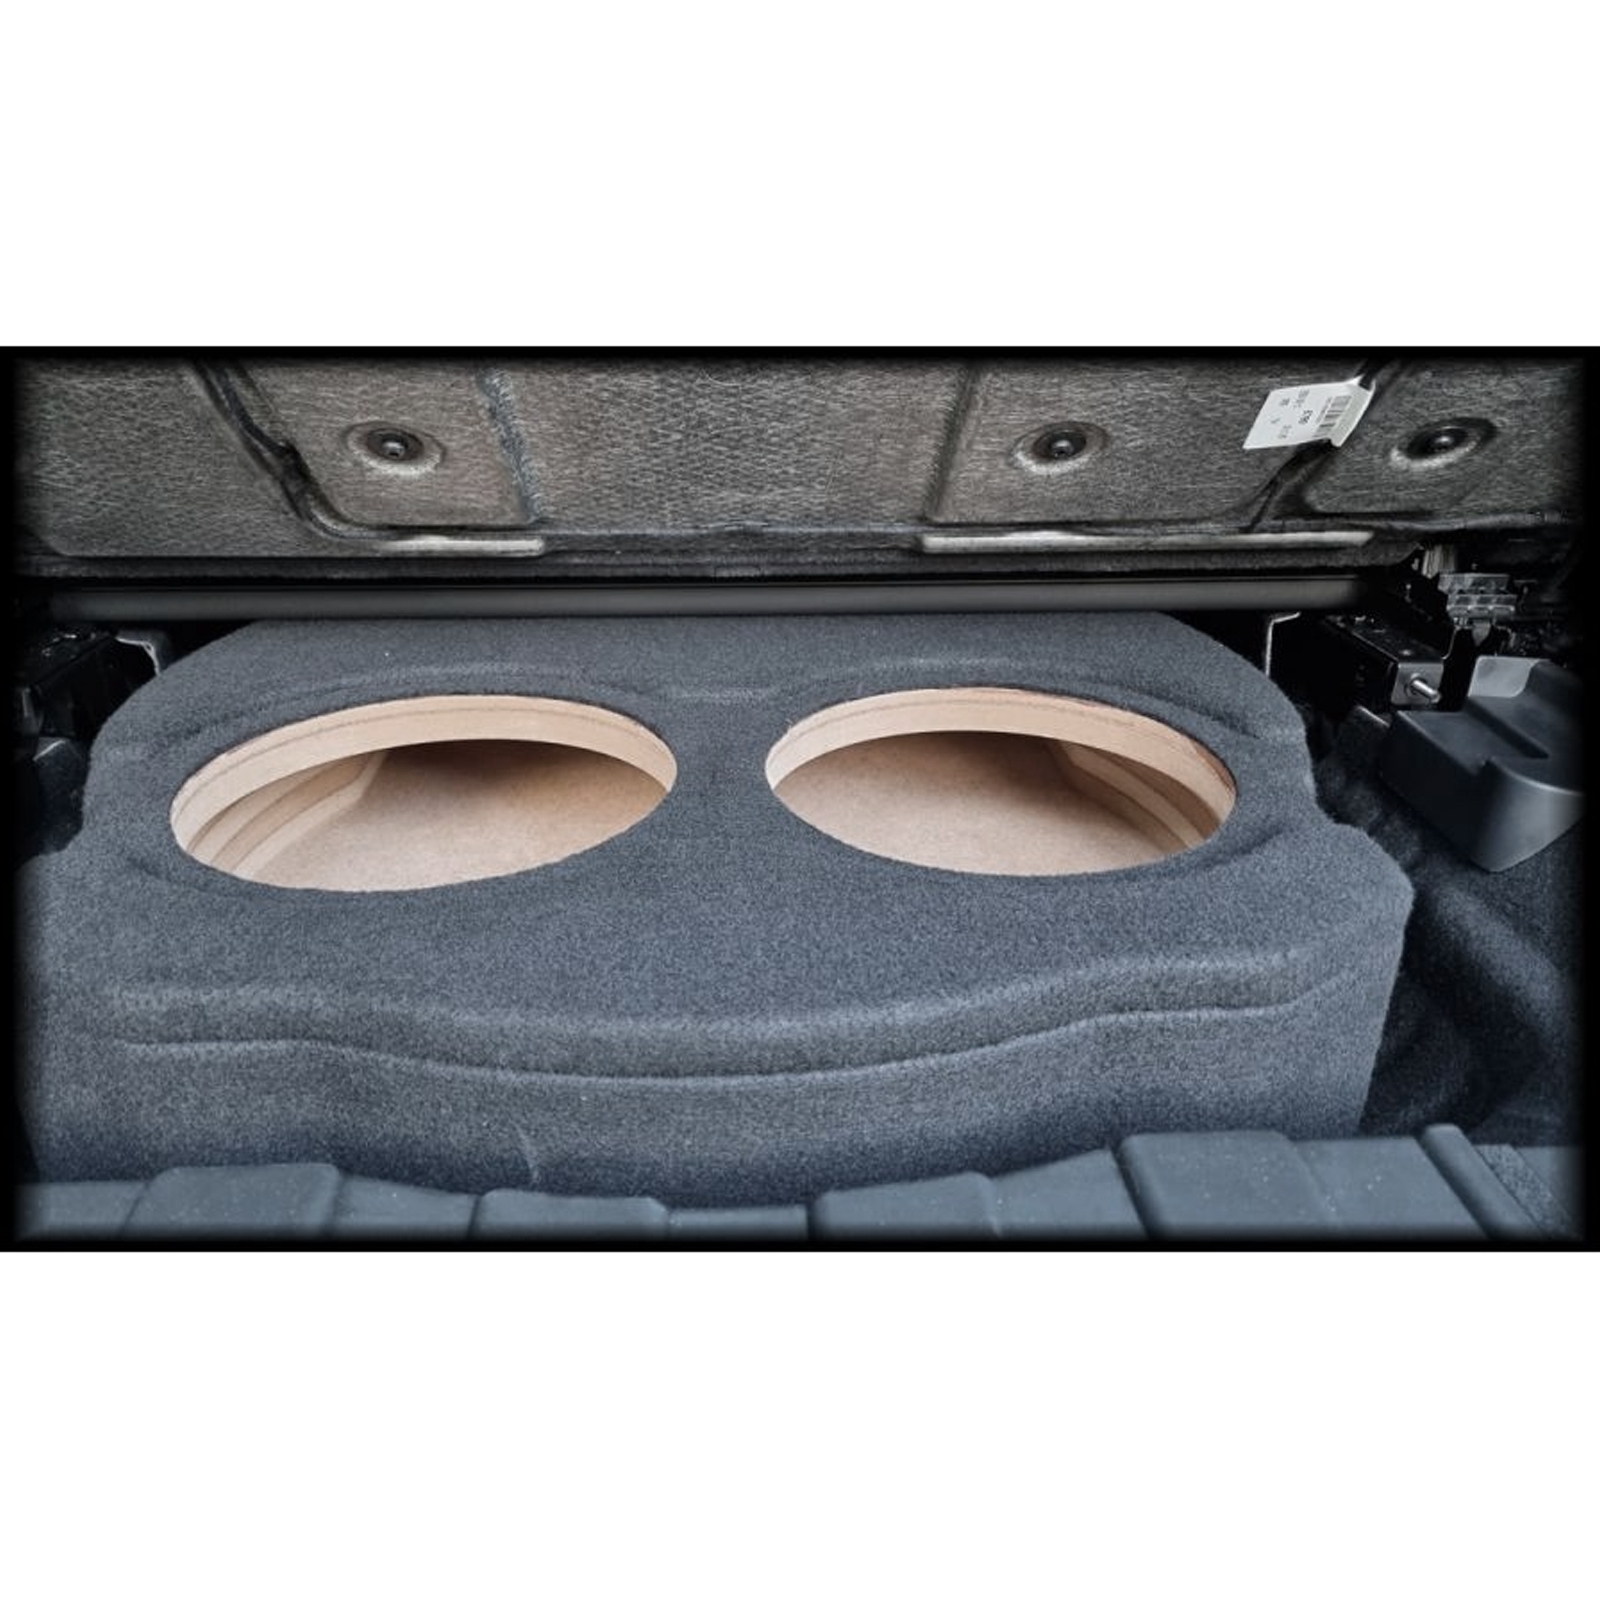 G05 2018 X5 eBay Fit subwoofer bass box BMW from Custom | enclosure for